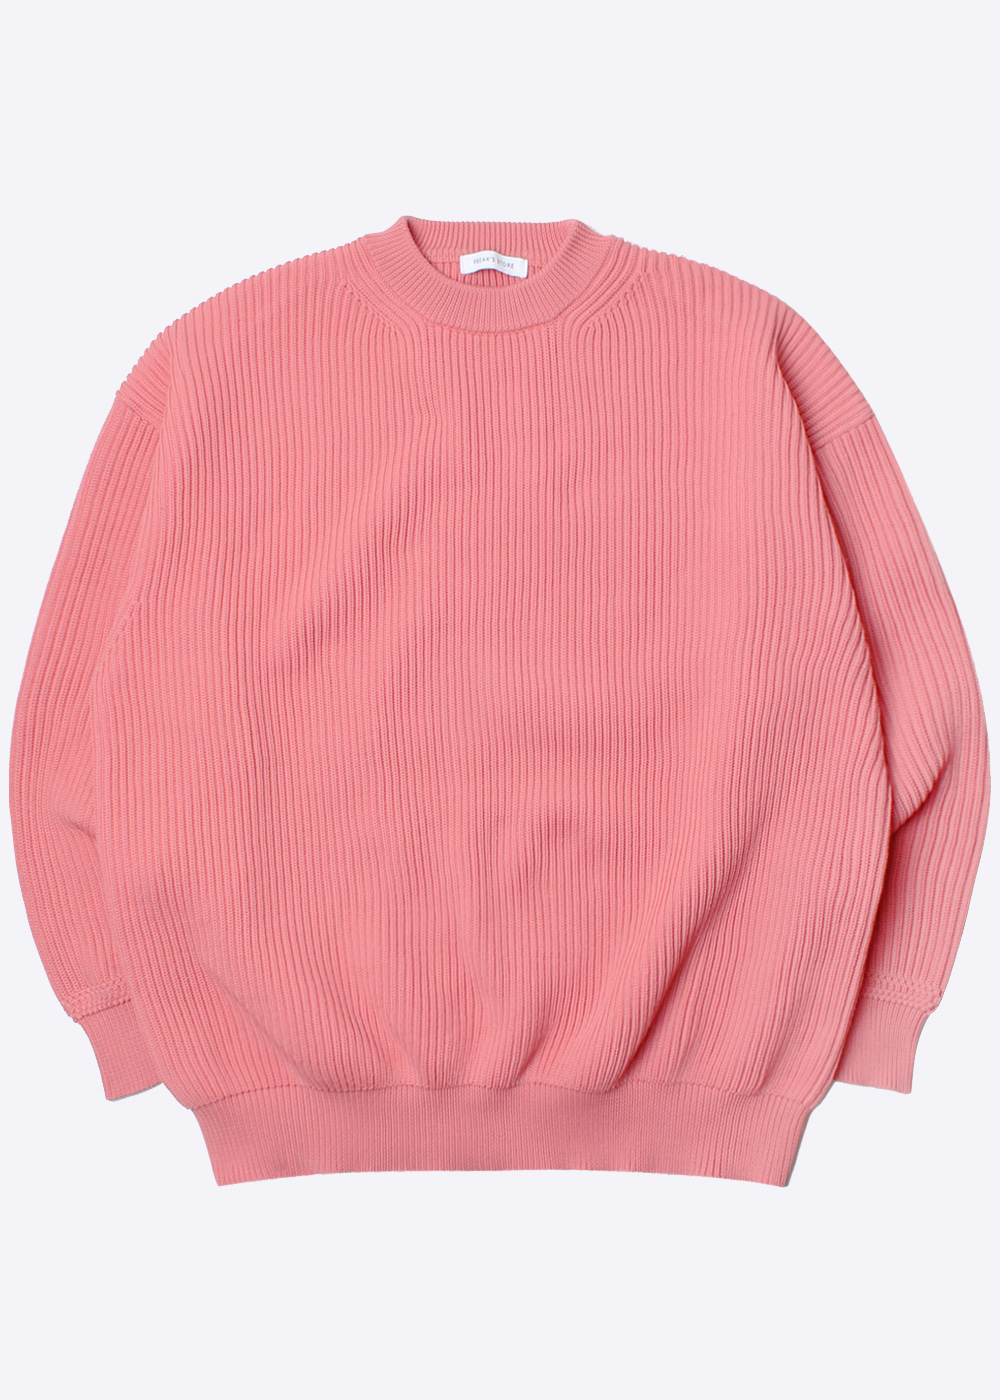 FREAK’S STORE‘over fit’ poly knit sweater